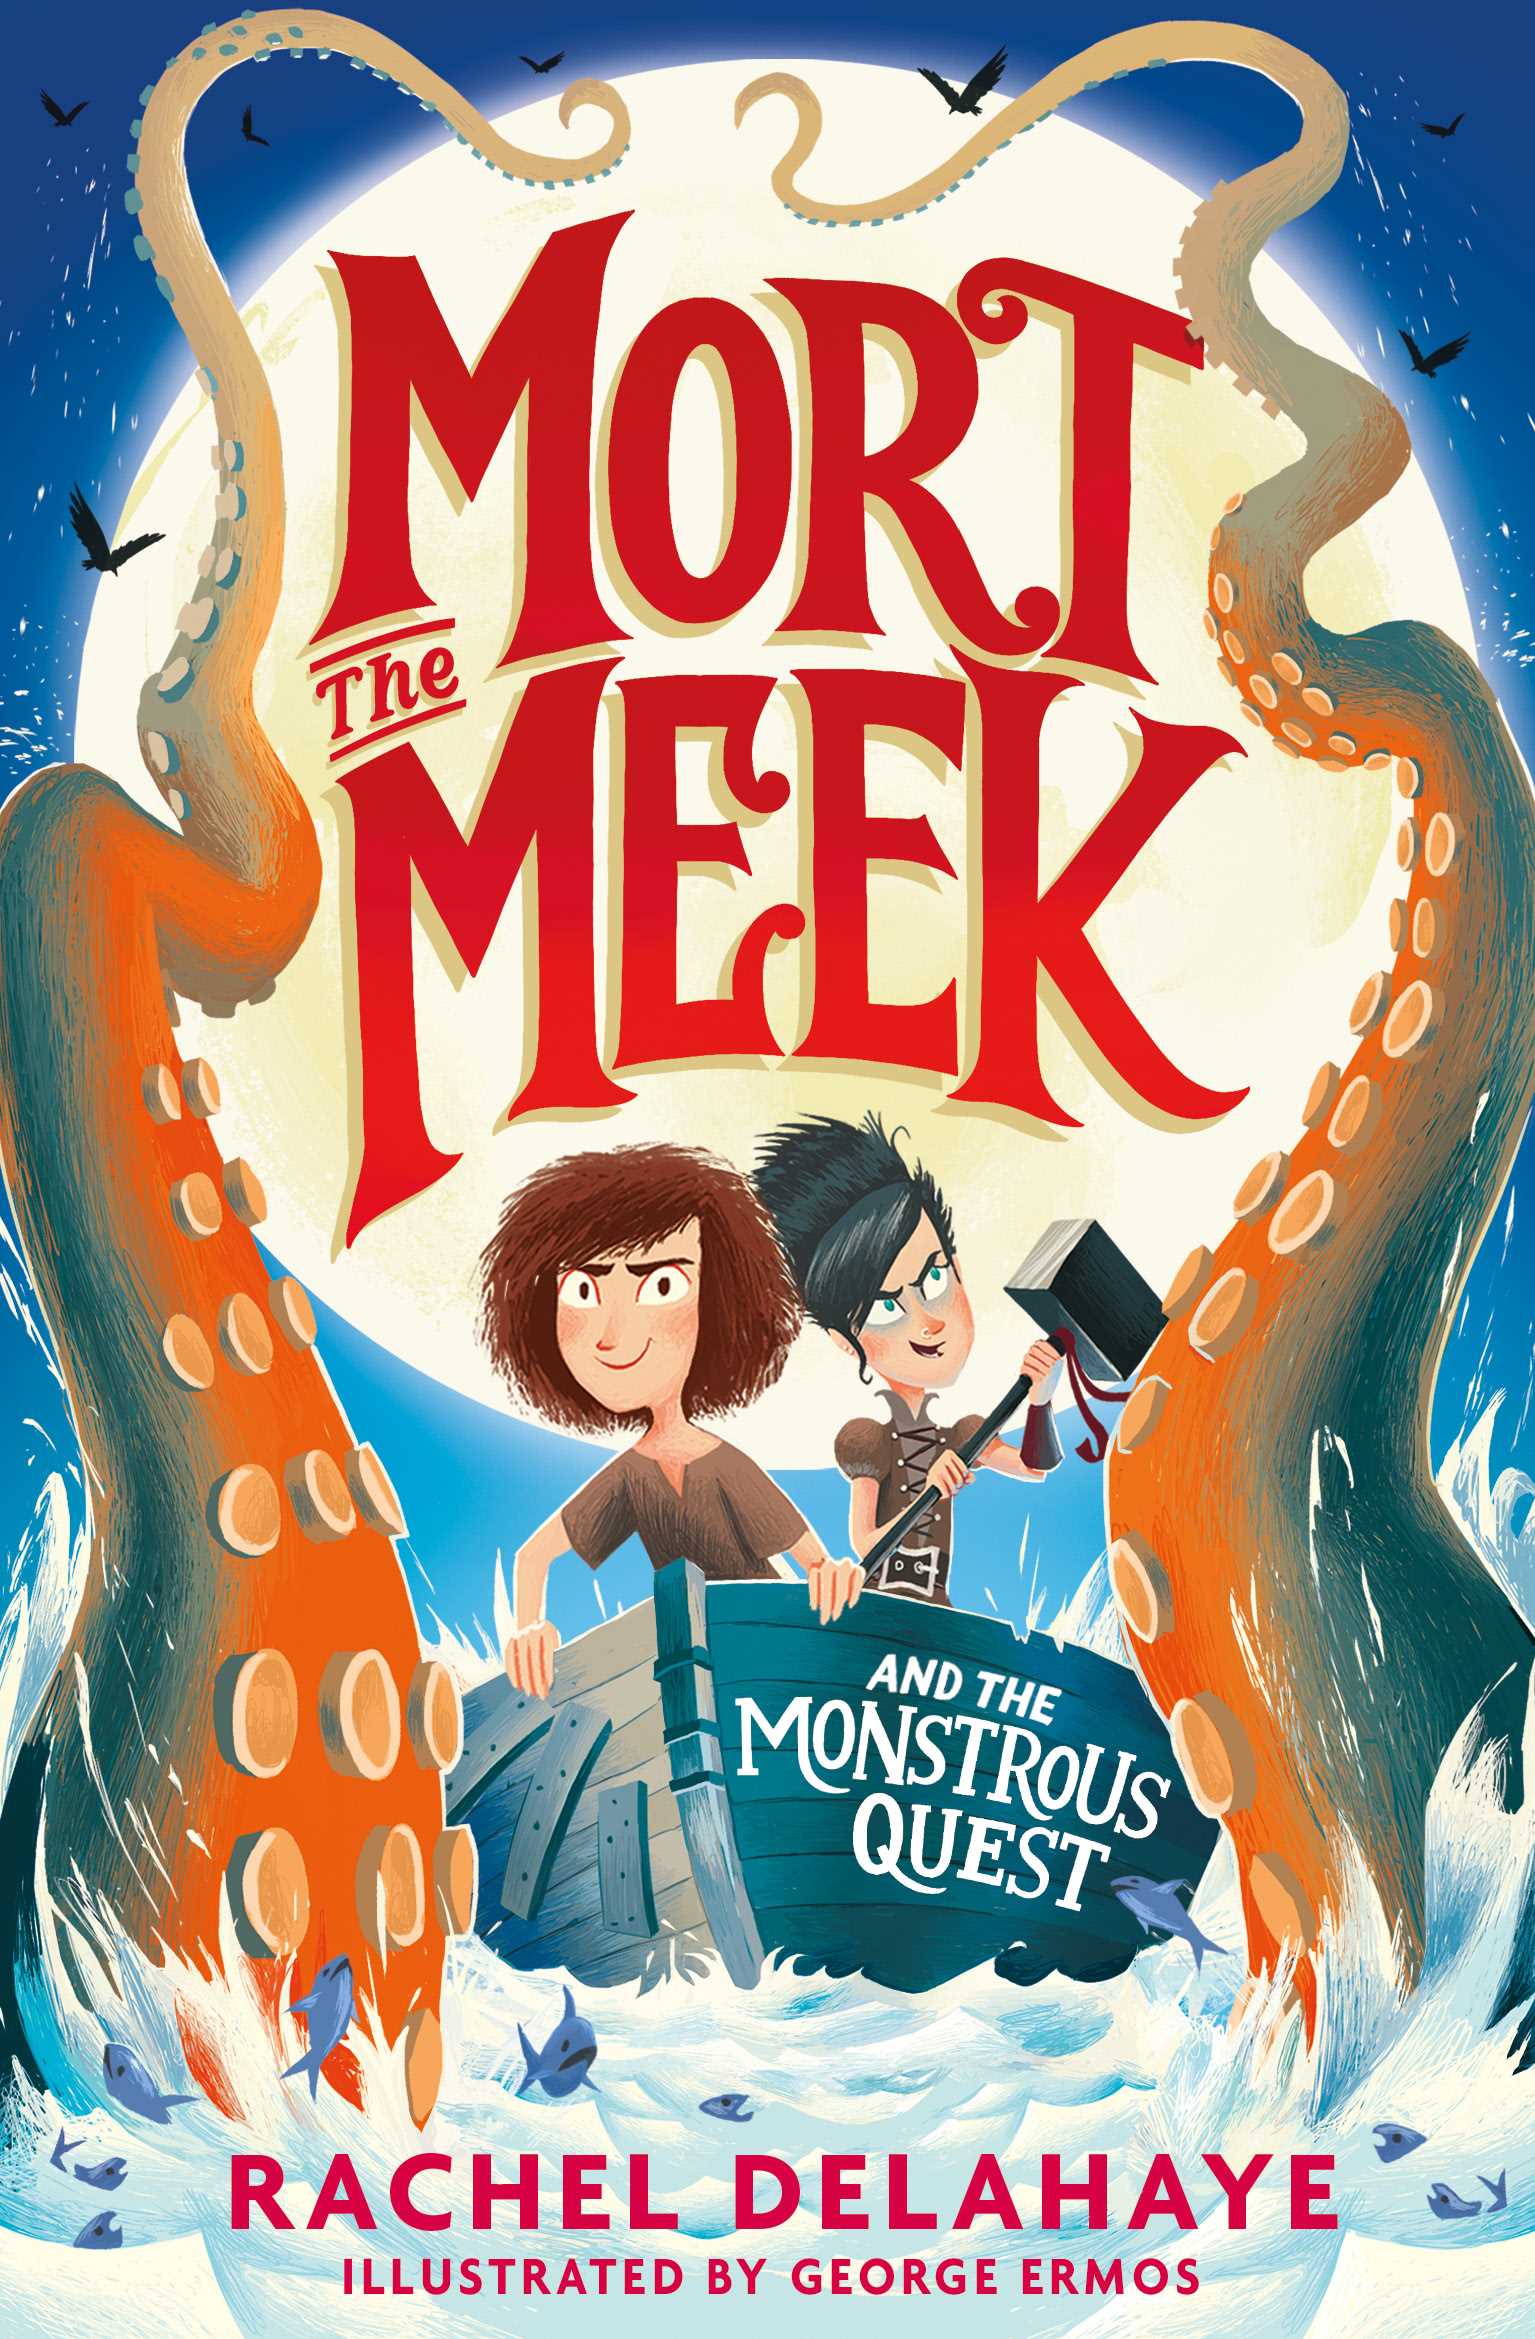 Mort The Meek #02: Mort the Meek and the Monstrous Quest